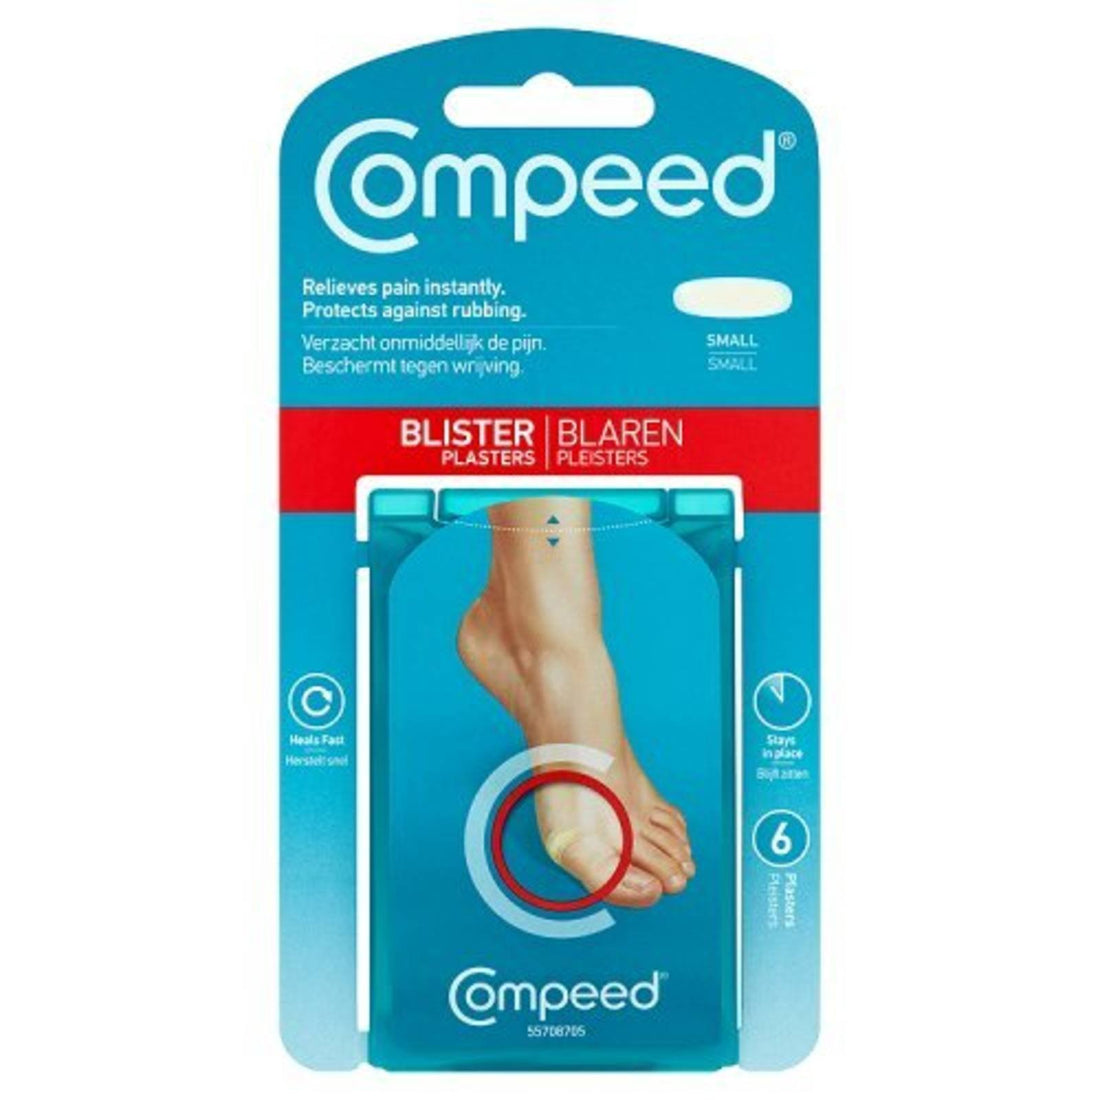 Pansements Blister Compeed Petits x6